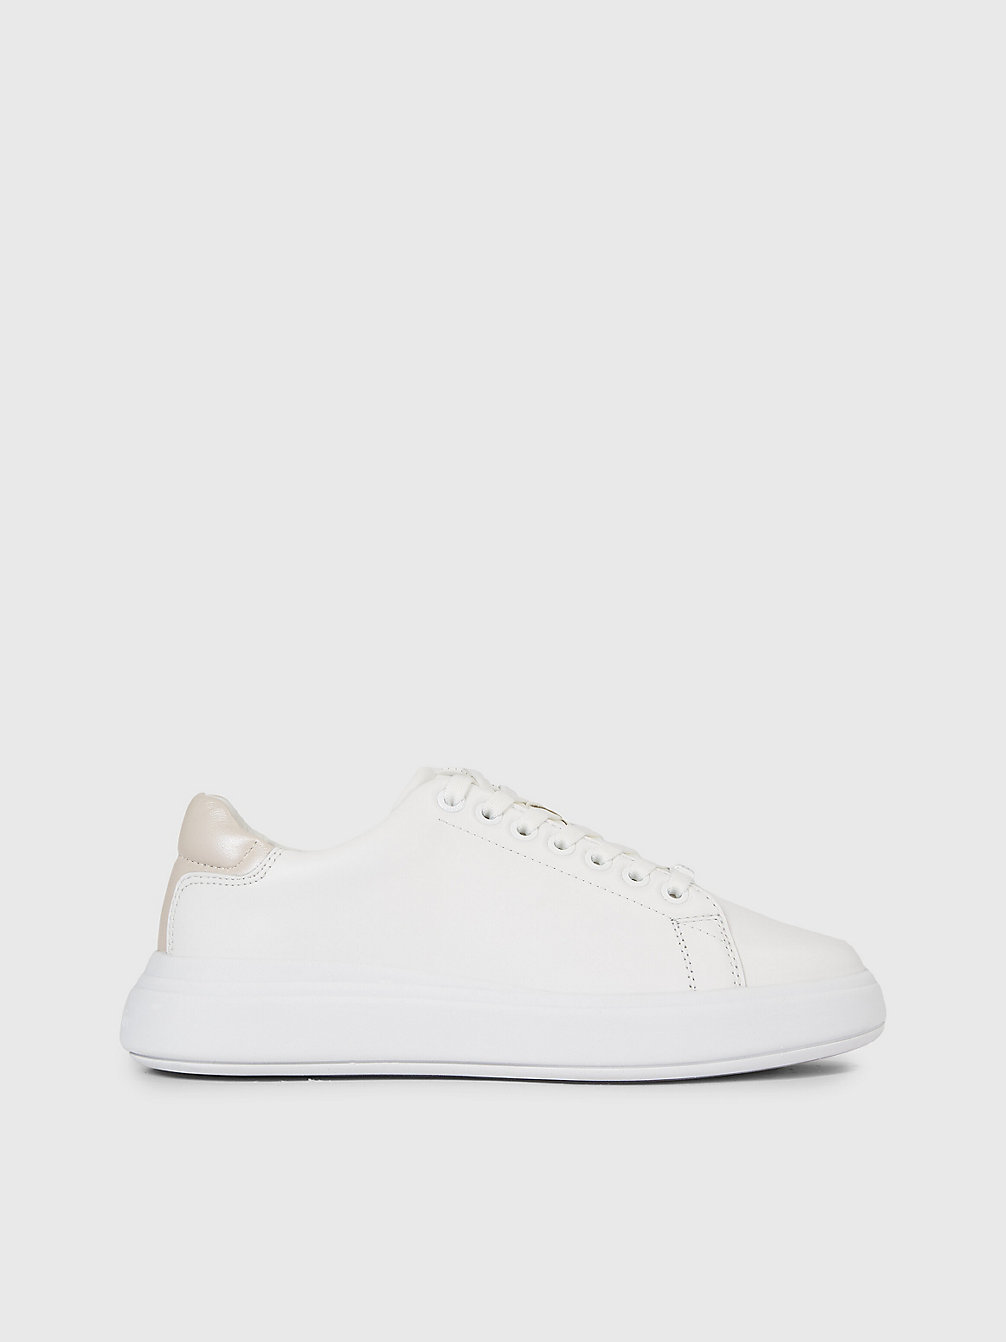 WHITE / CRYSTAL GRAY Leather Trainers undefined women Calvin Klein